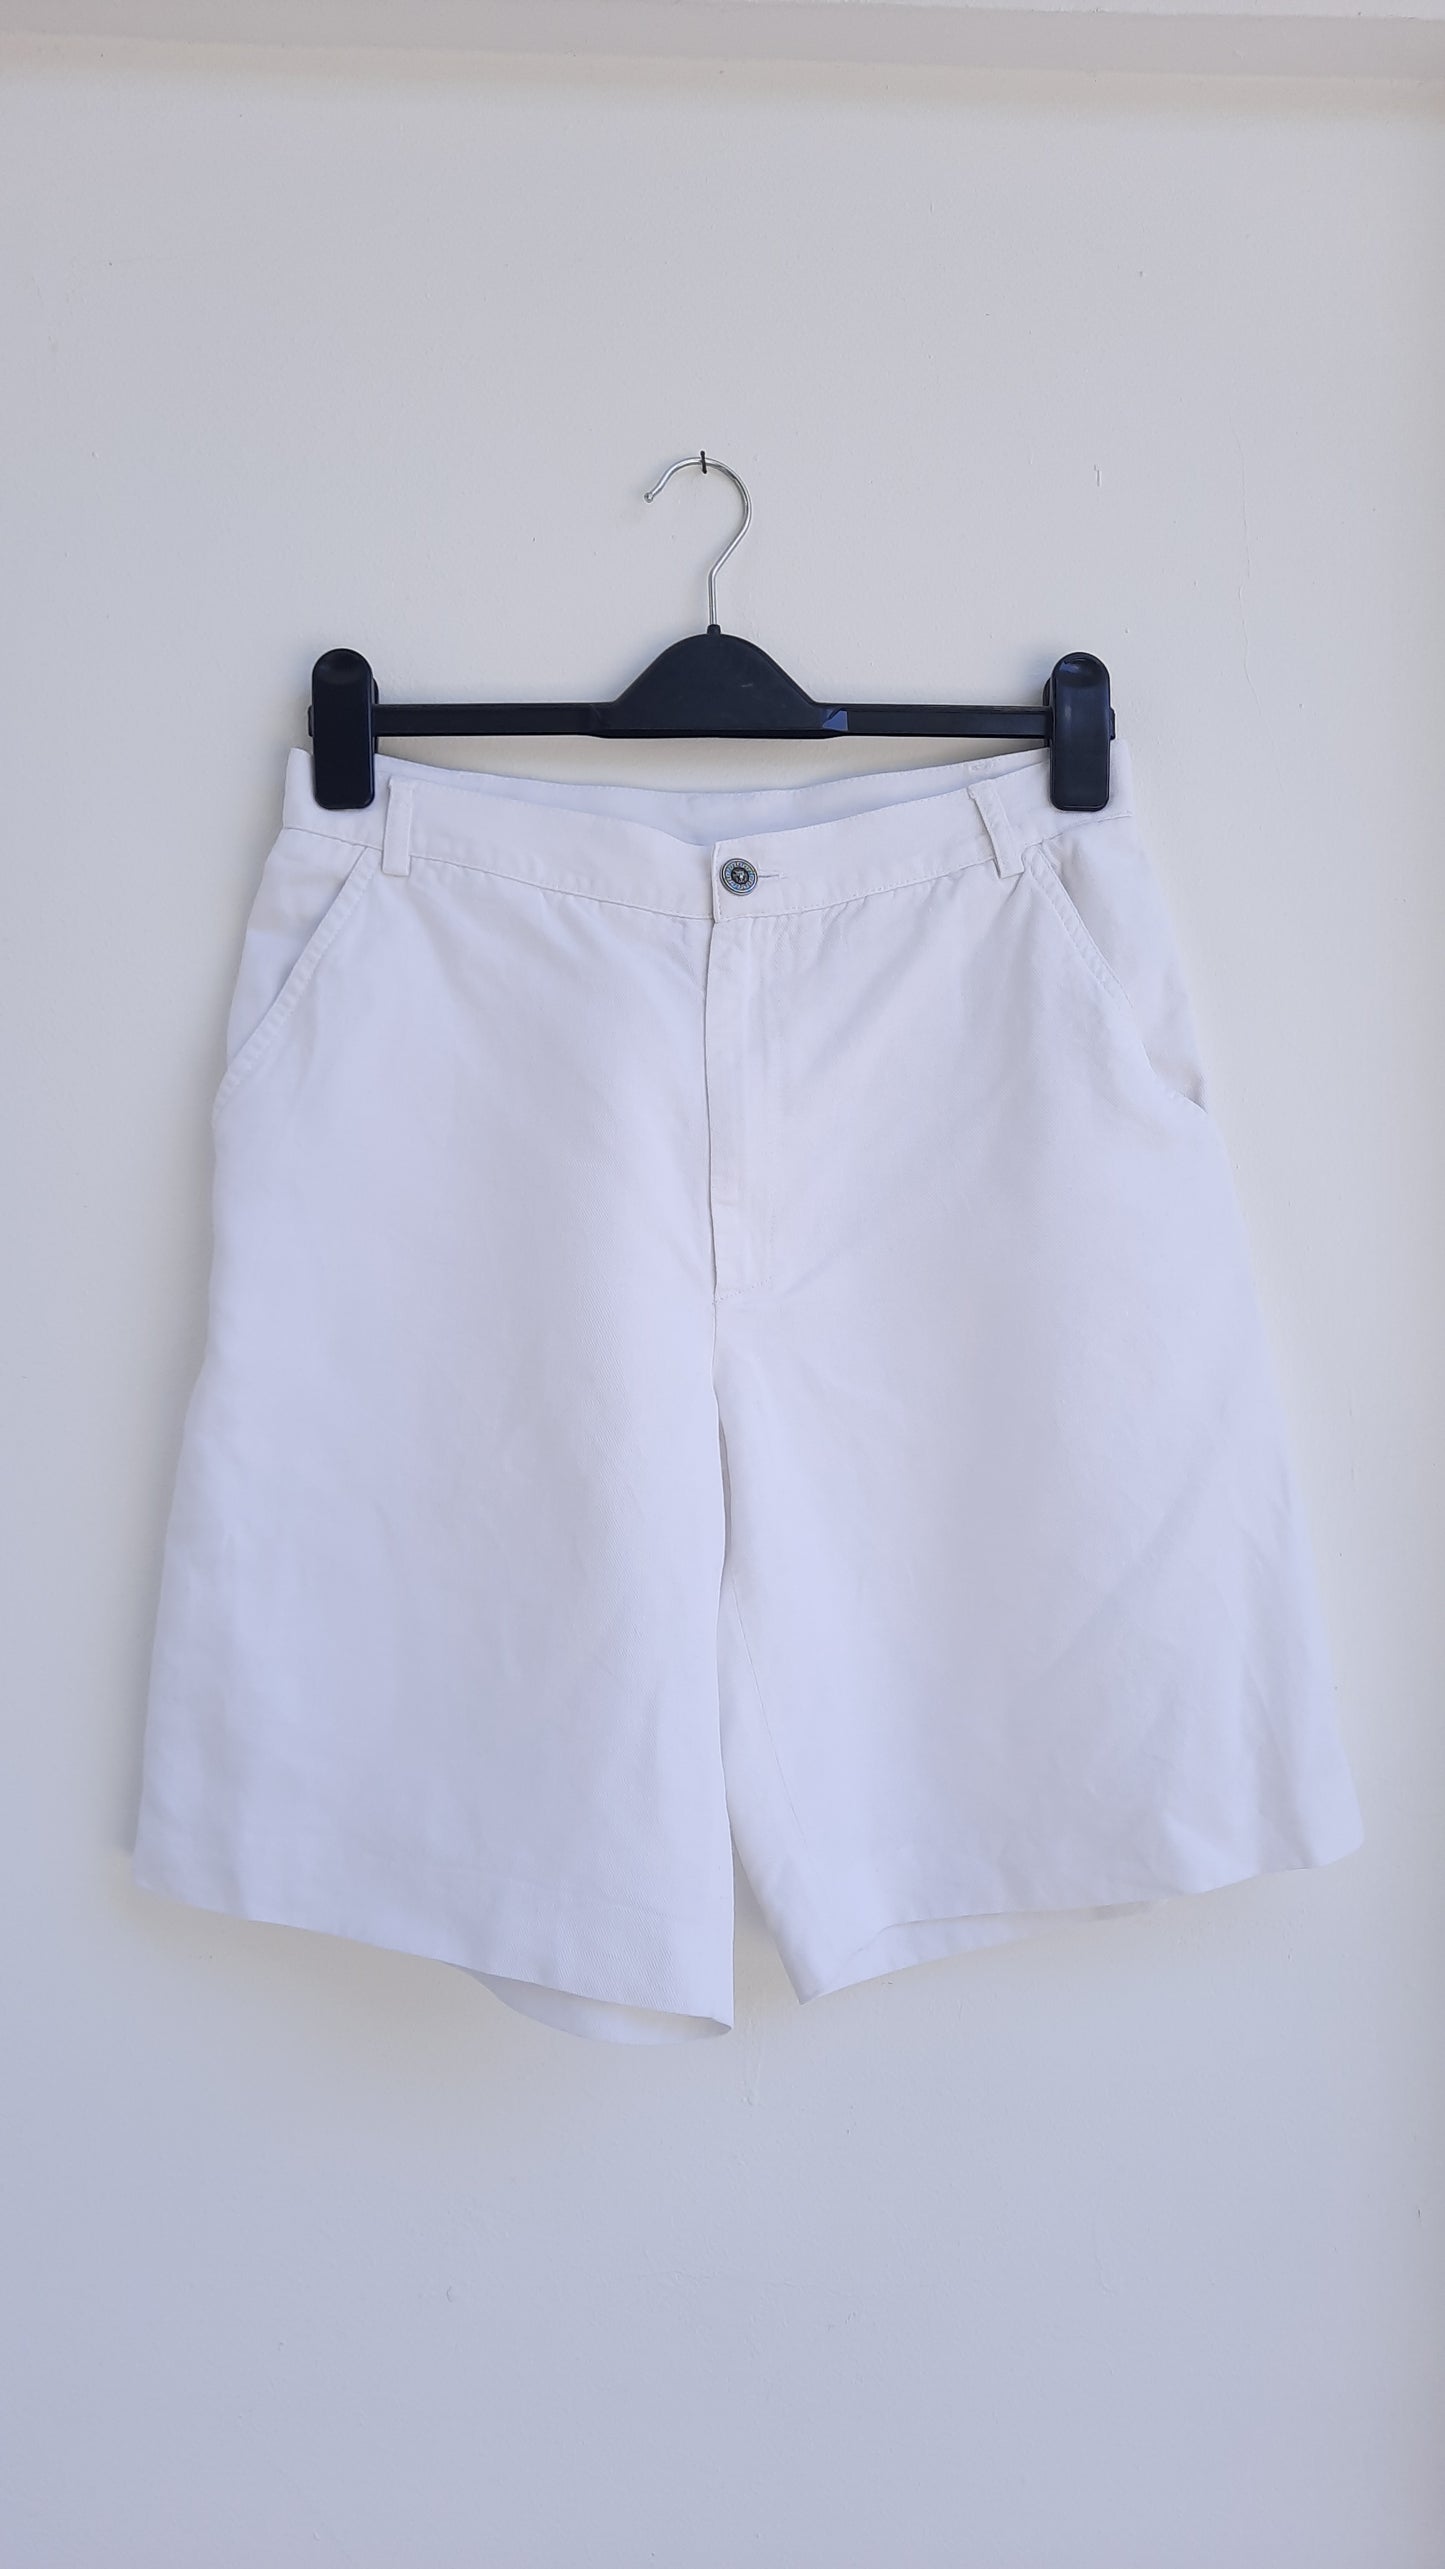 Vintage Versus by Gianni Versace Classic White Shorts